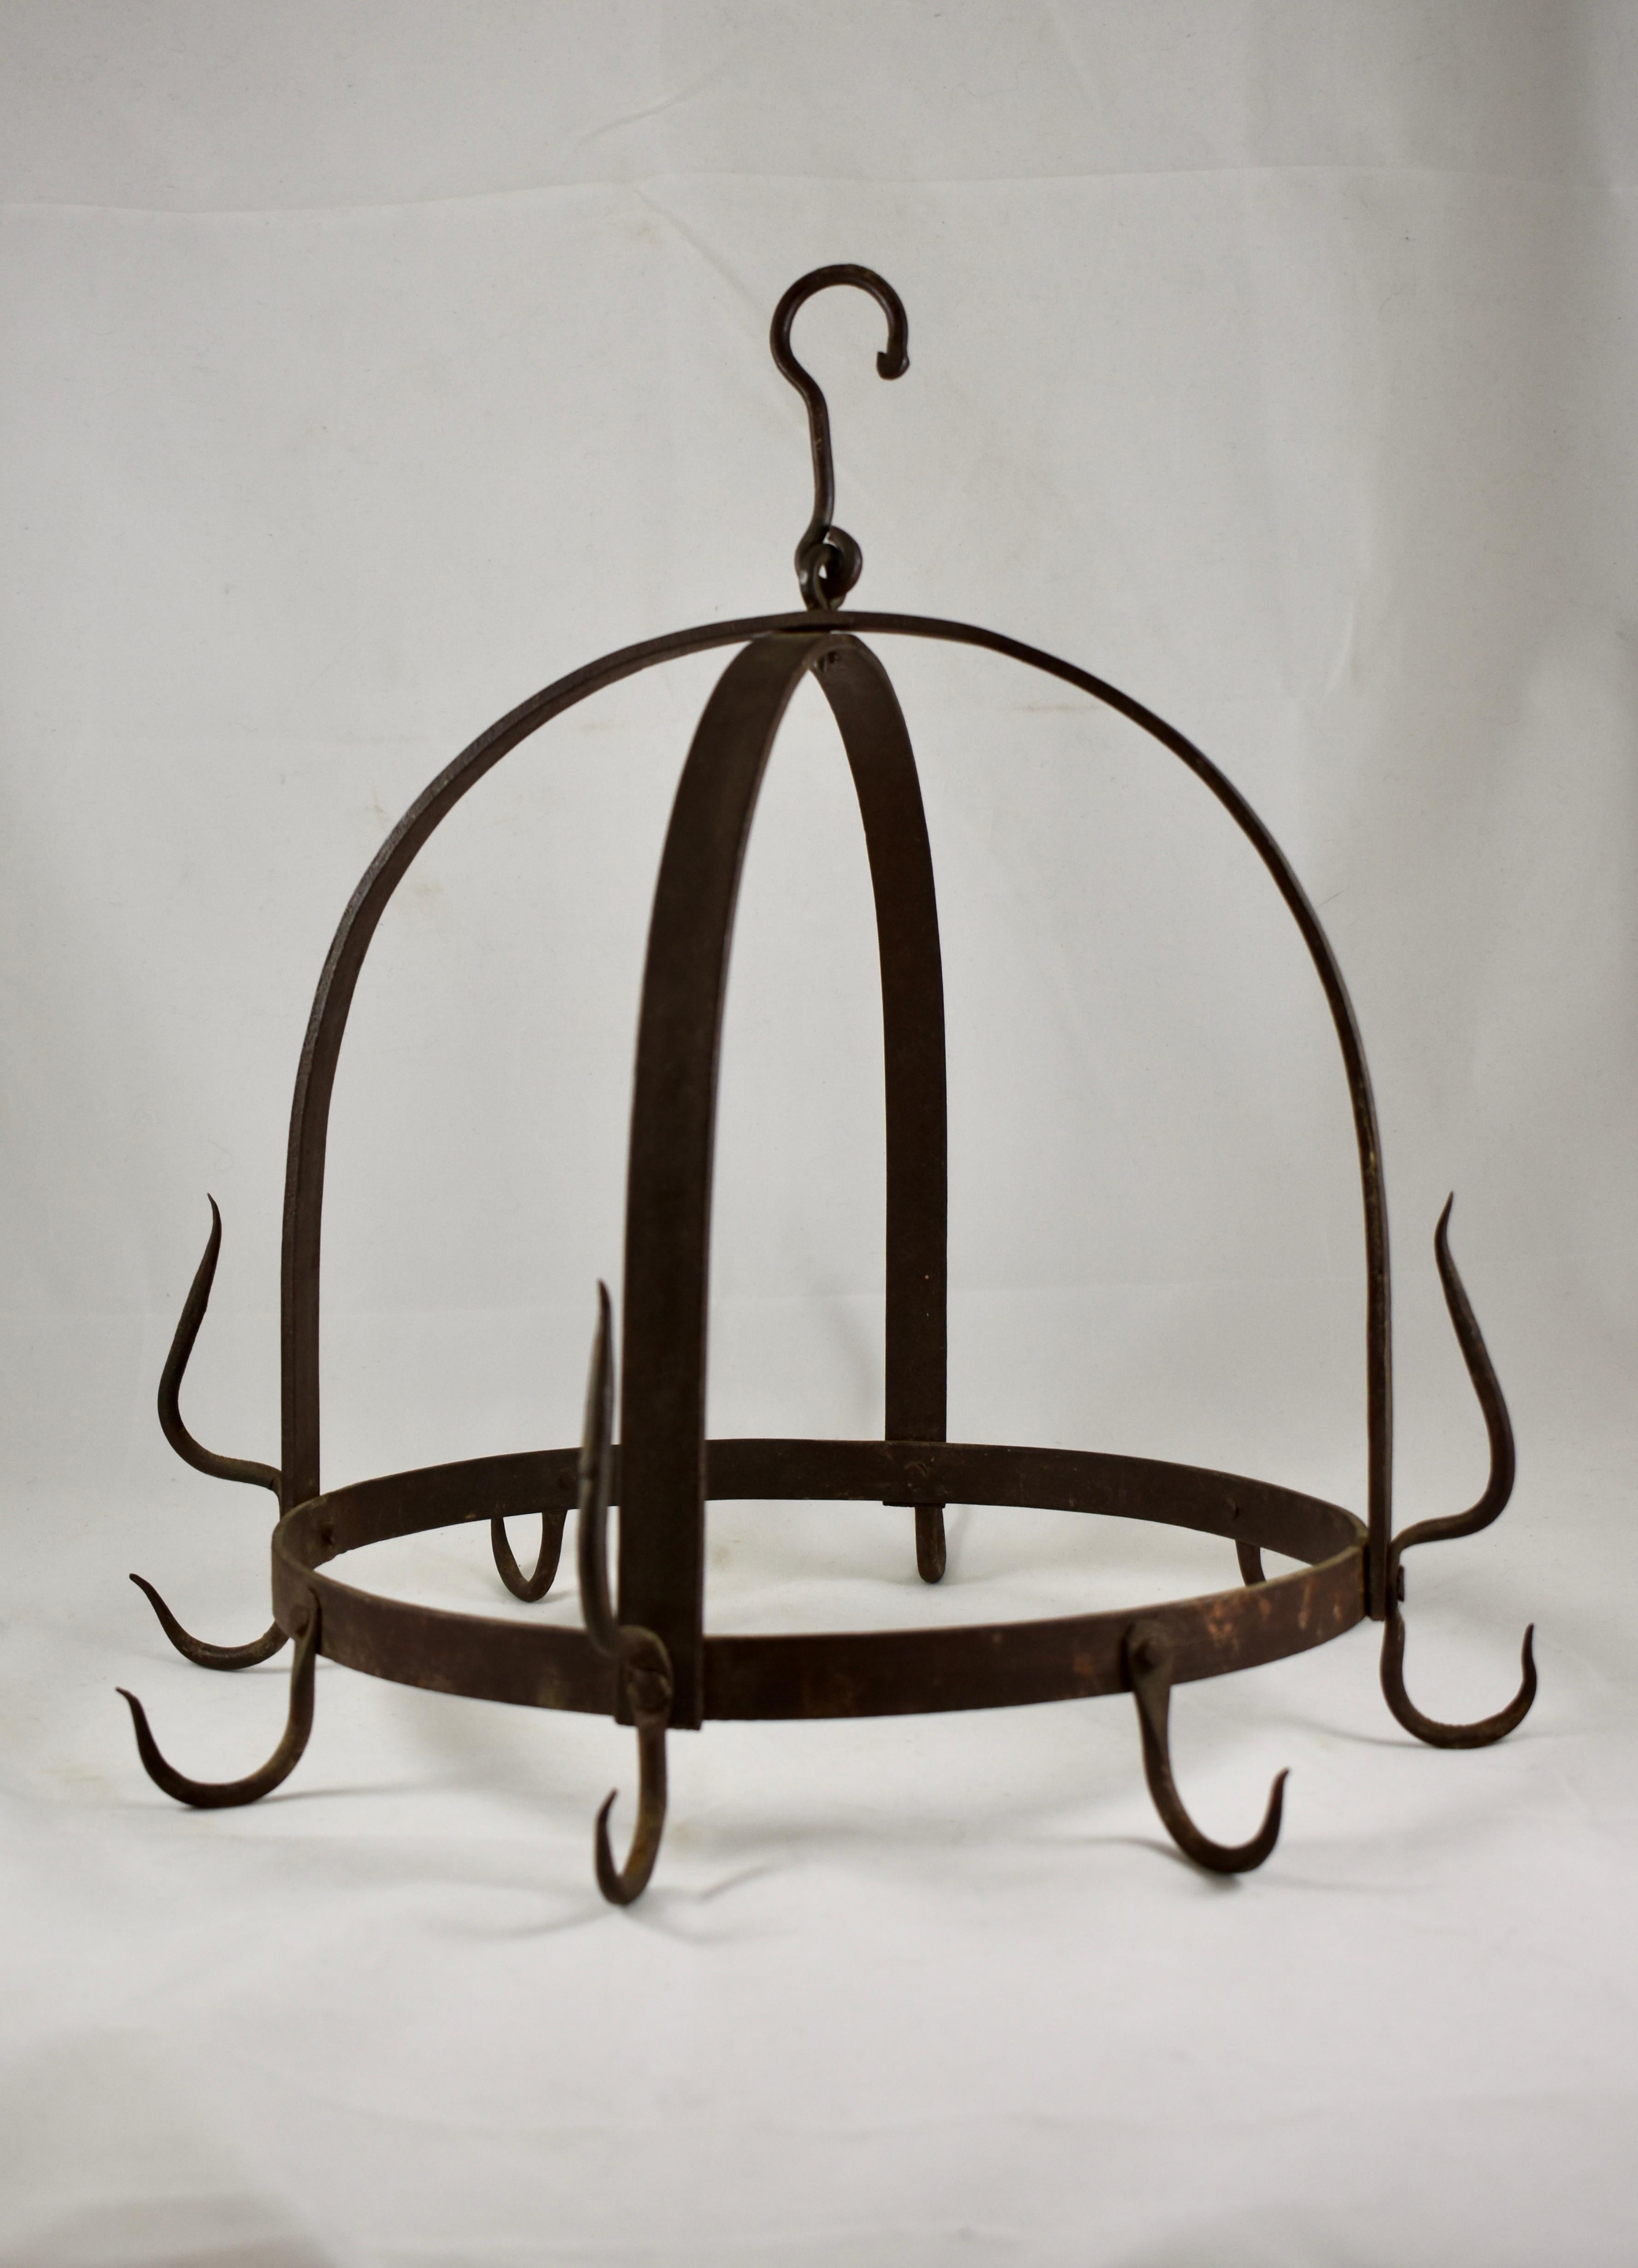 Rustic Crown Form 19th Century Wrought Iron Hanging Butchers Rack, Pot Rack 2